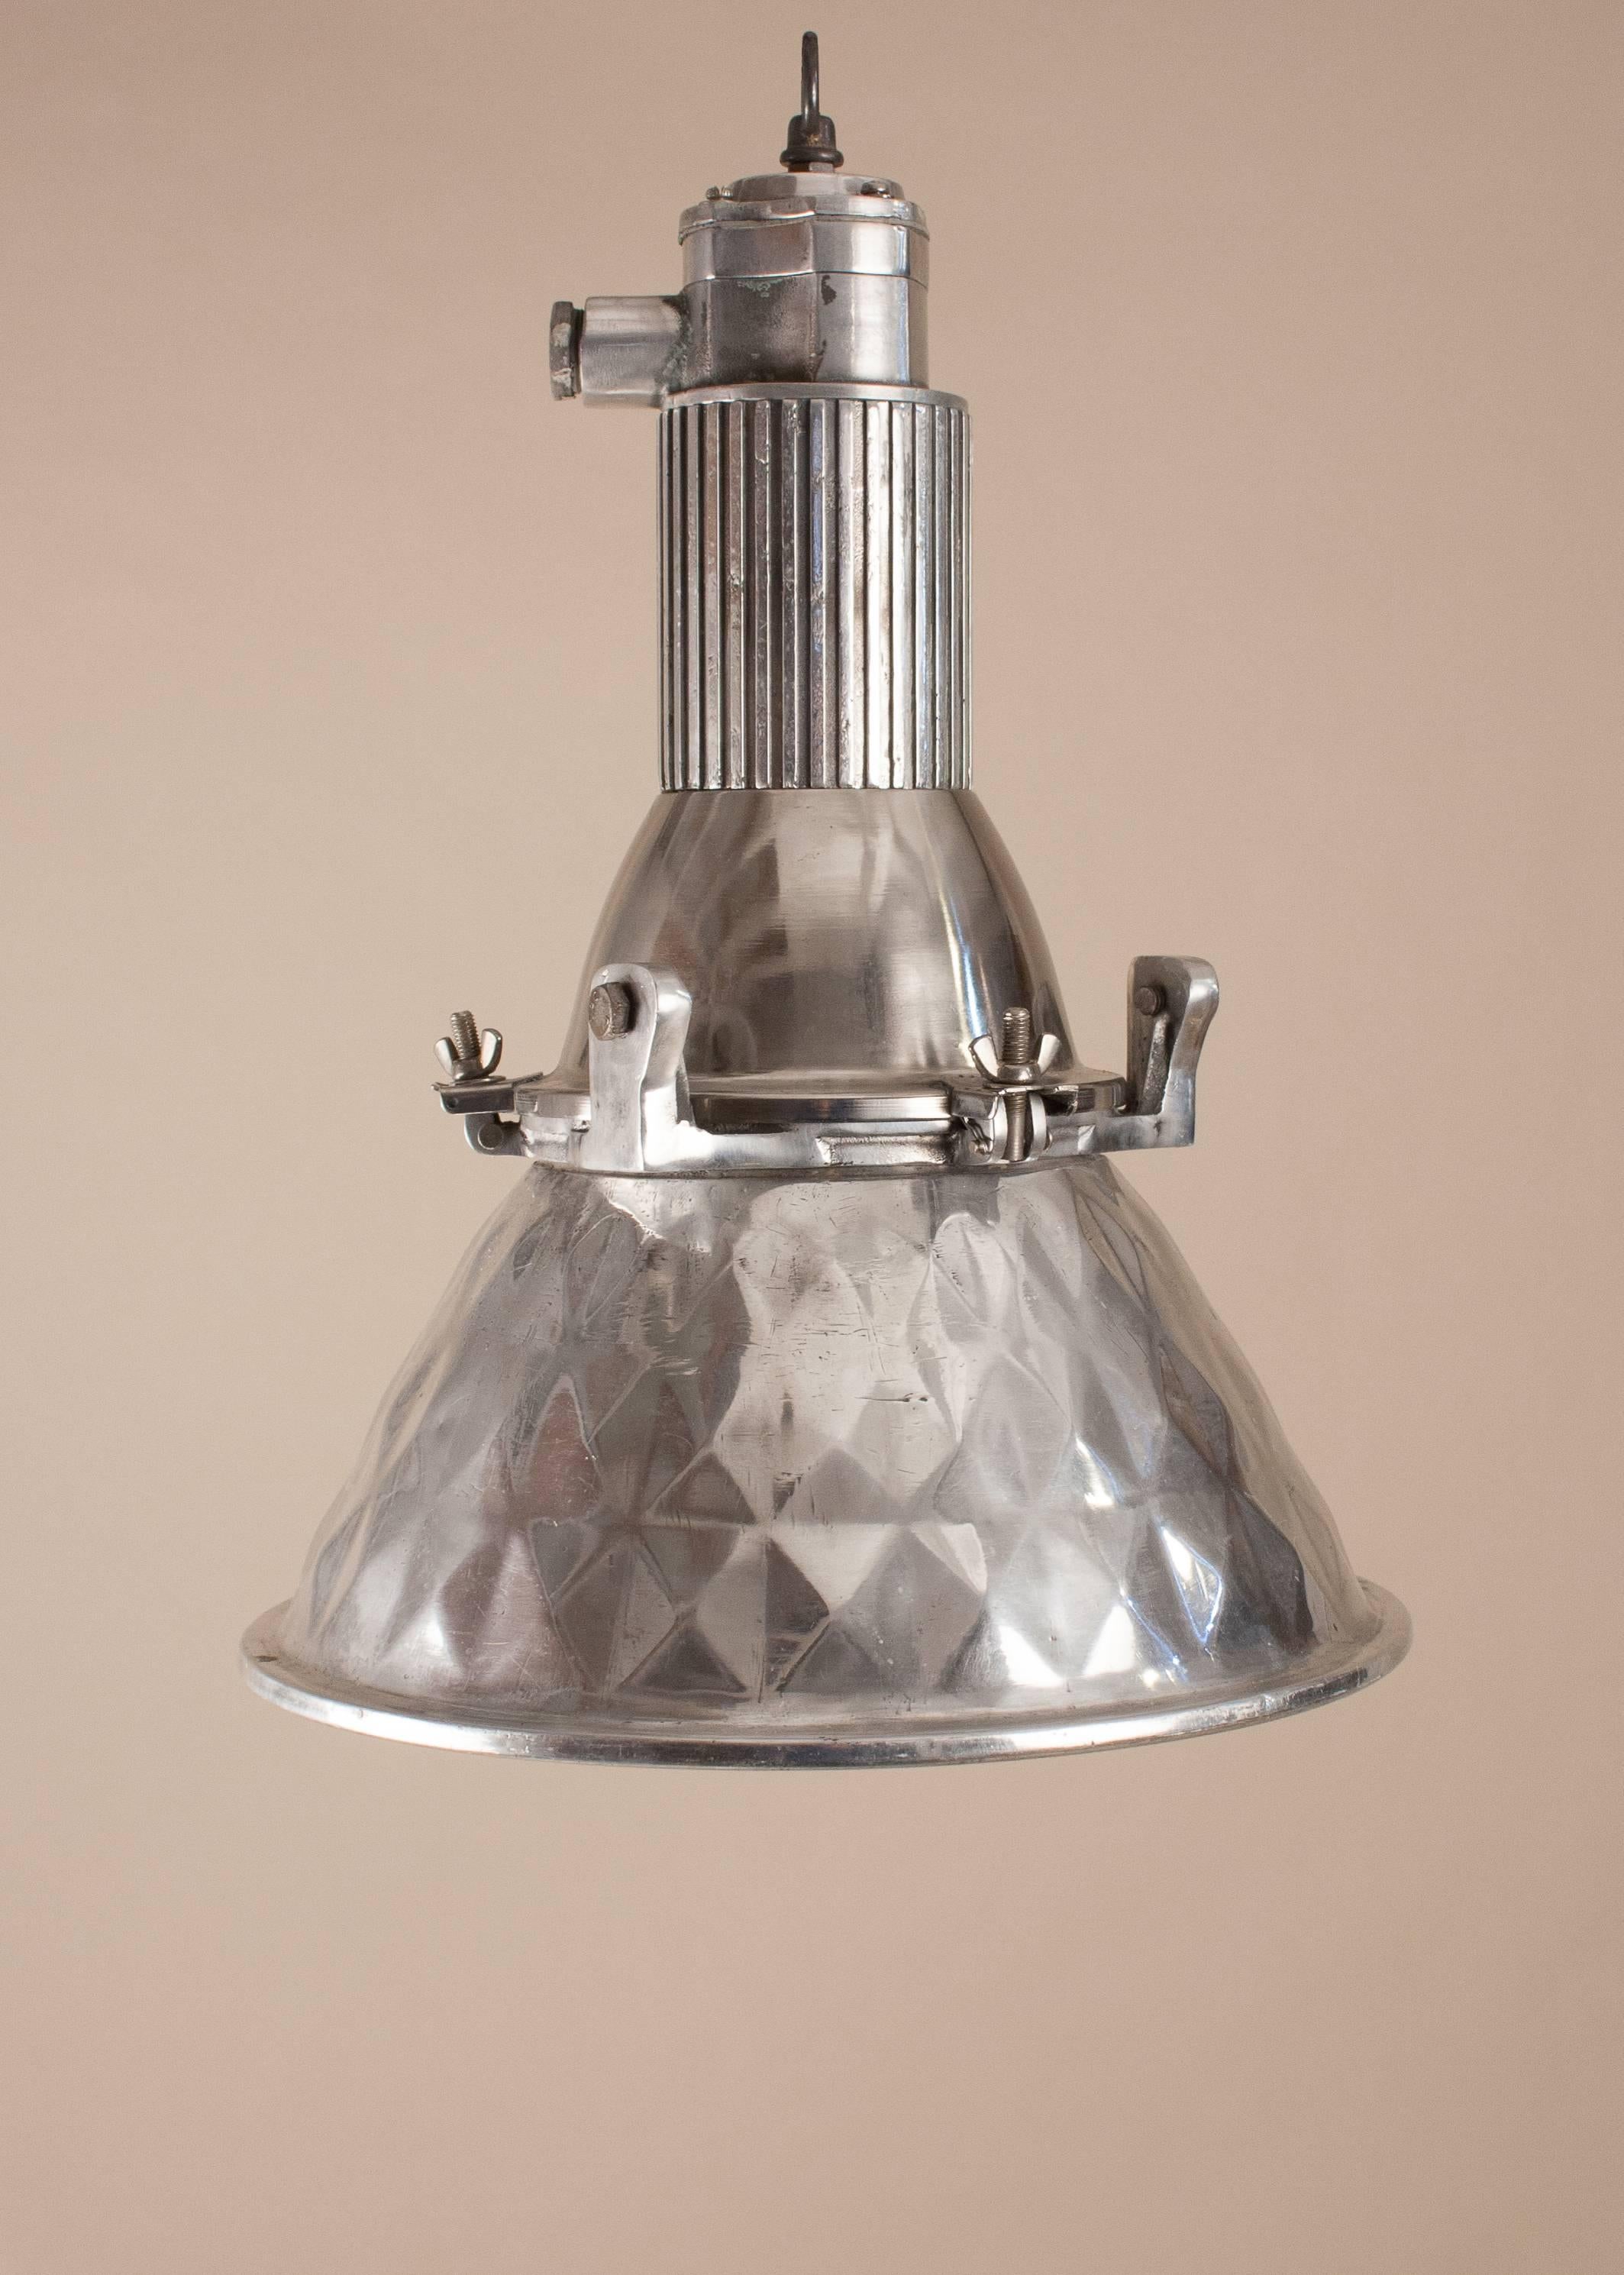 Mid-Century polished aluminum industrial or nautical spotlight with a pressed geometric pattern on both the outside and inside of the shade. The pendant's modest size makes it perfect in most any space. The light has been professionally restored and